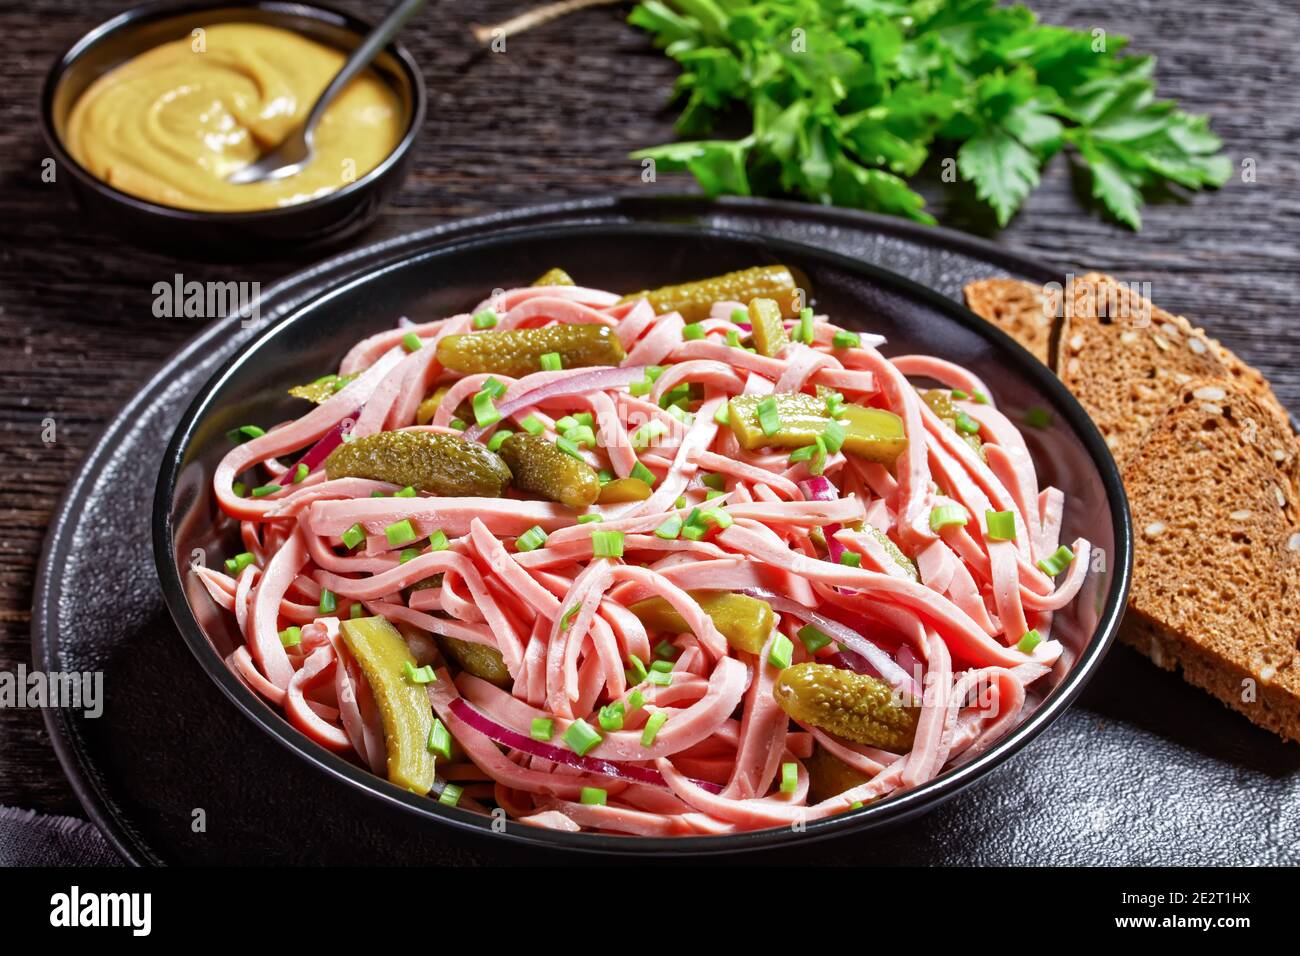 German wurstsalat of cooked german lyoner sausage with pickled cucumbers, red onion slices, vinegar dressing served on a black bowl on a dark wooden b Stock Photo